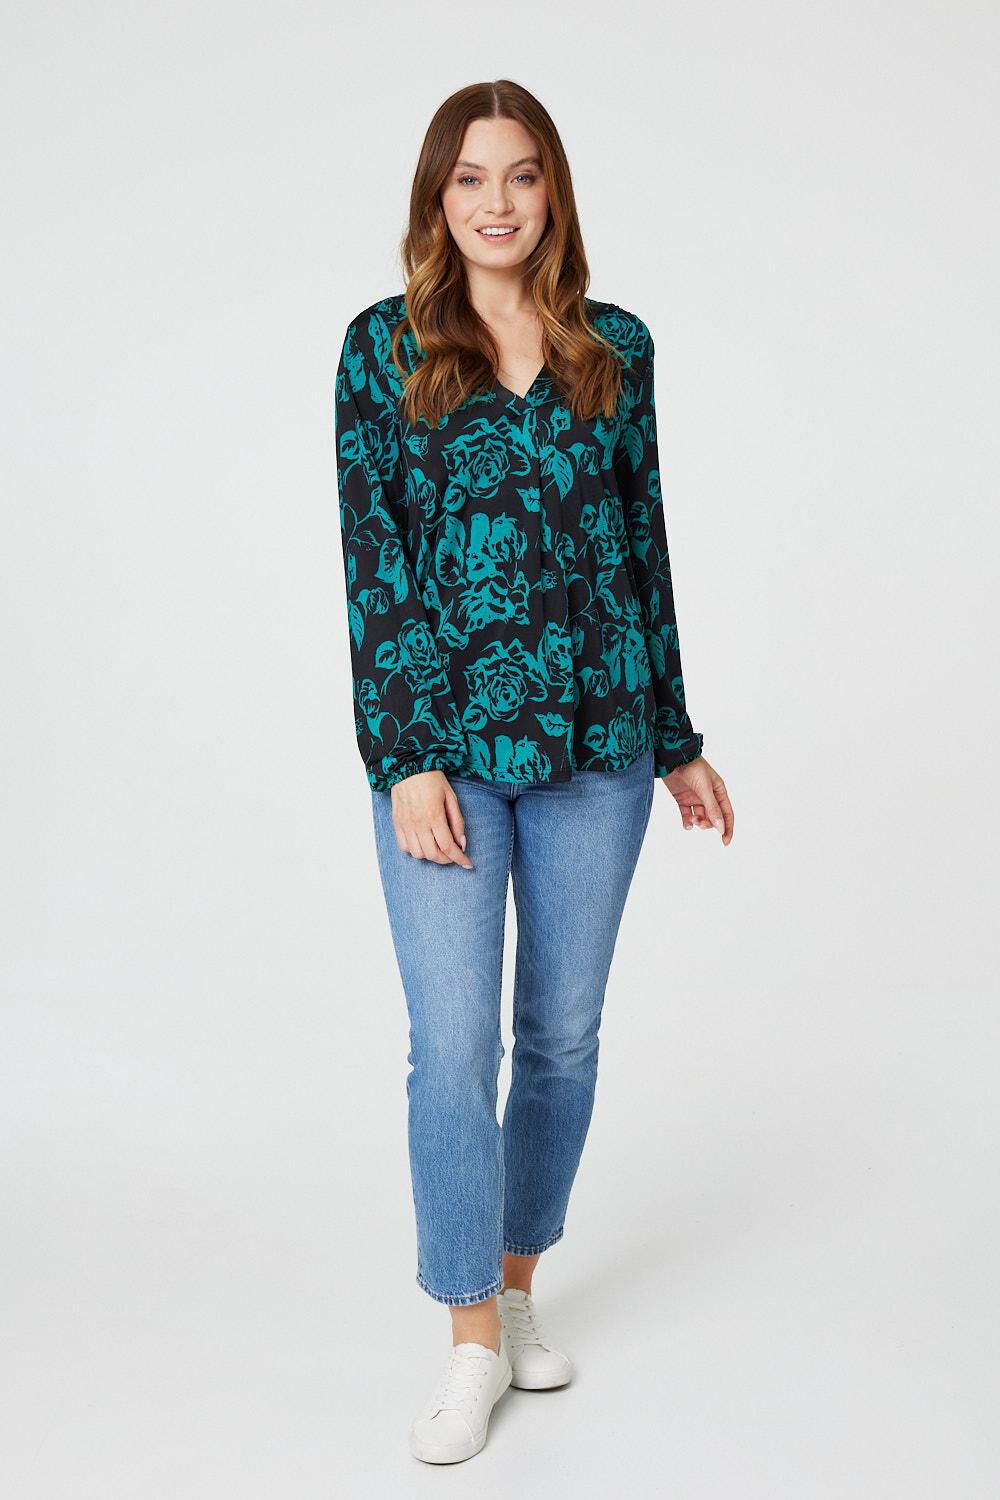 Izabel London Women’s Green and Black Floral Print Long Sleeve Relaxed Blouse, Size: 14